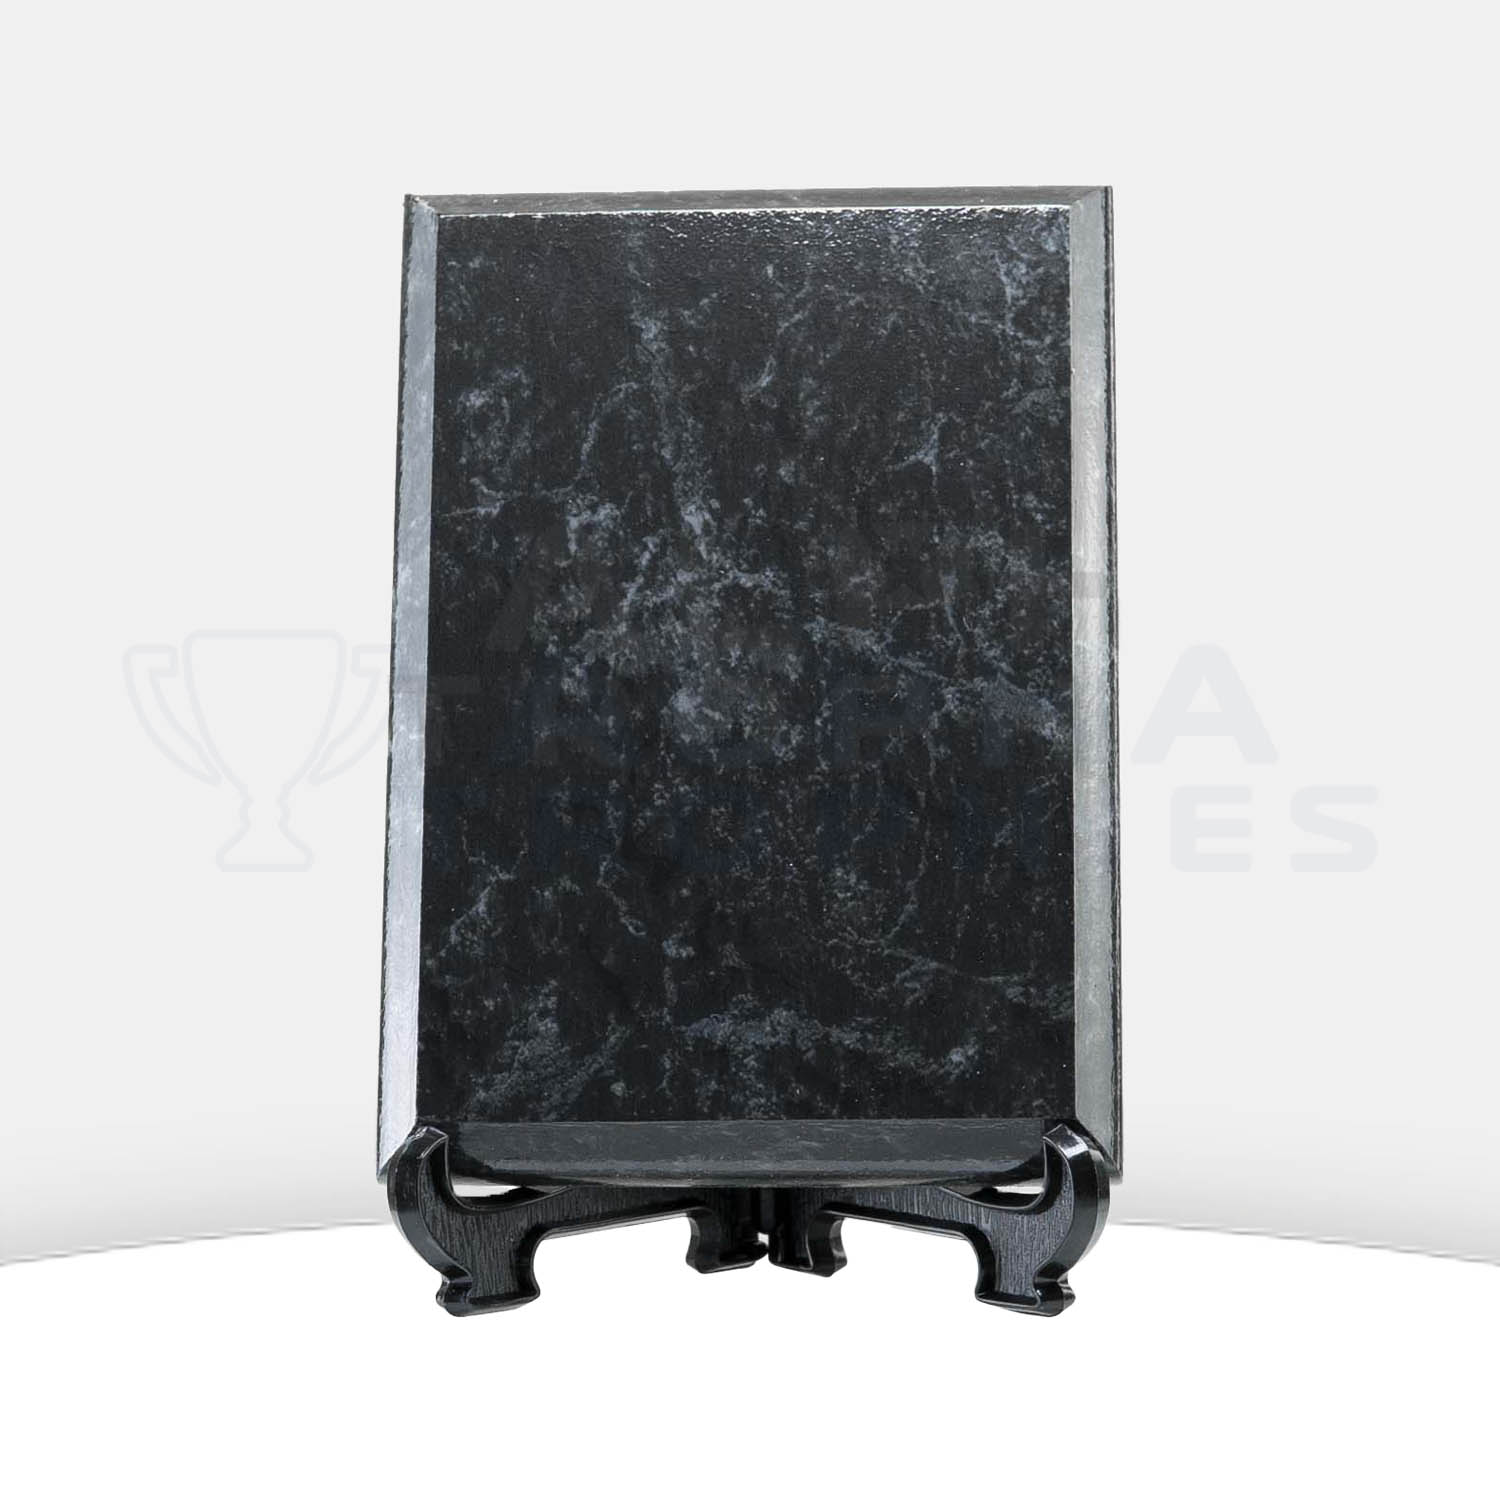 black-marble-plaque-on-easel-stand-front-4141